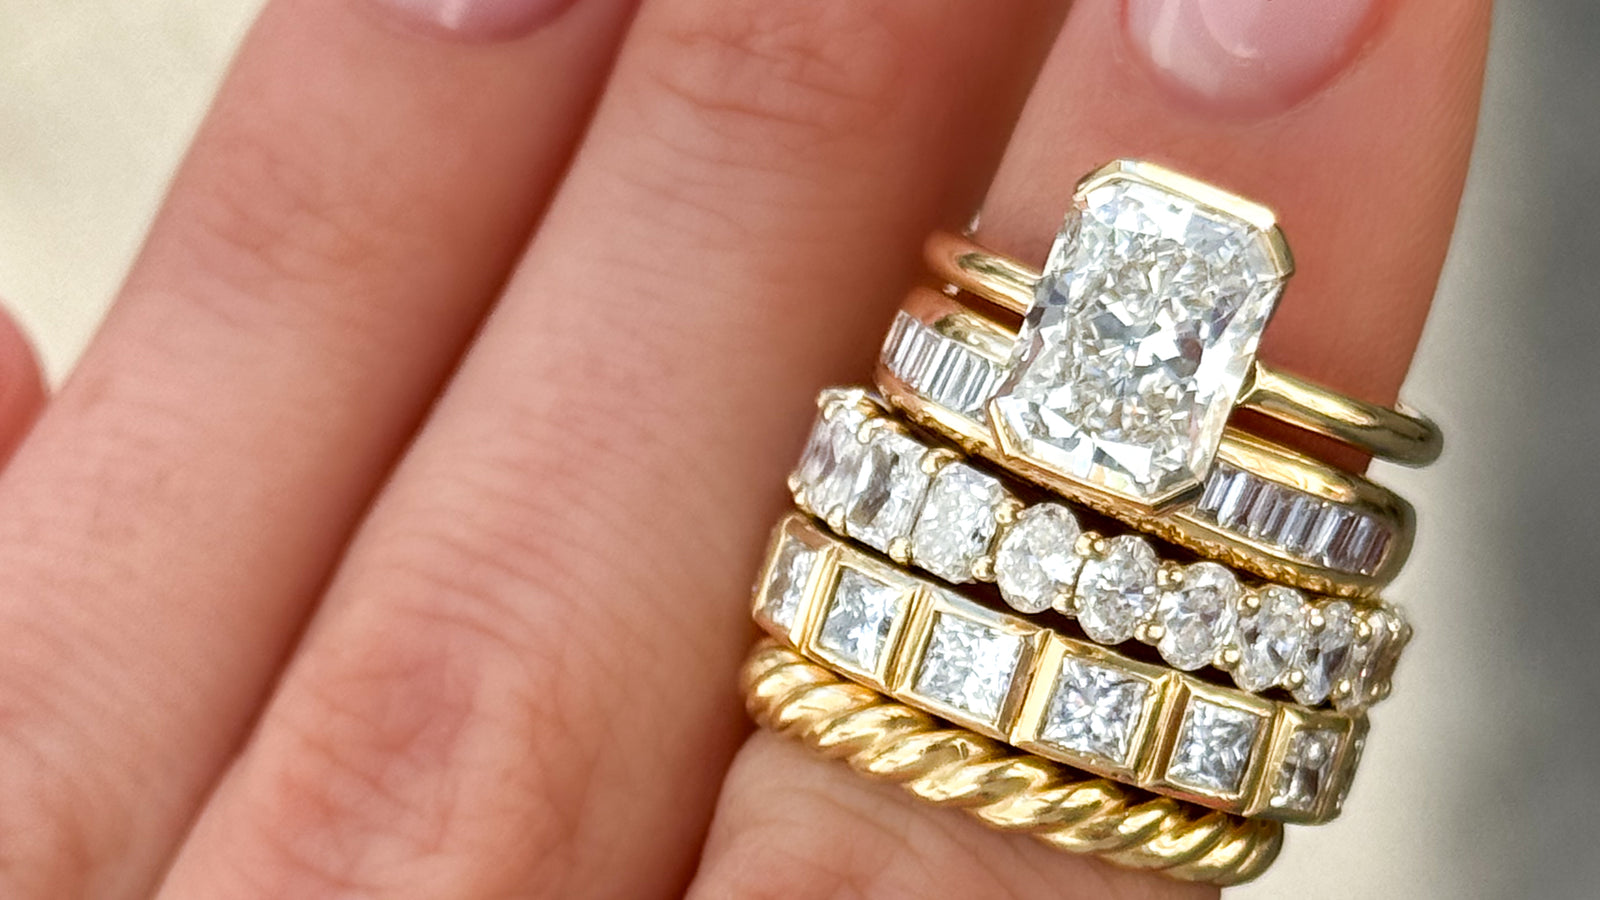 5 Ring Stacking Trends Portlanders Can't Get Enough Of